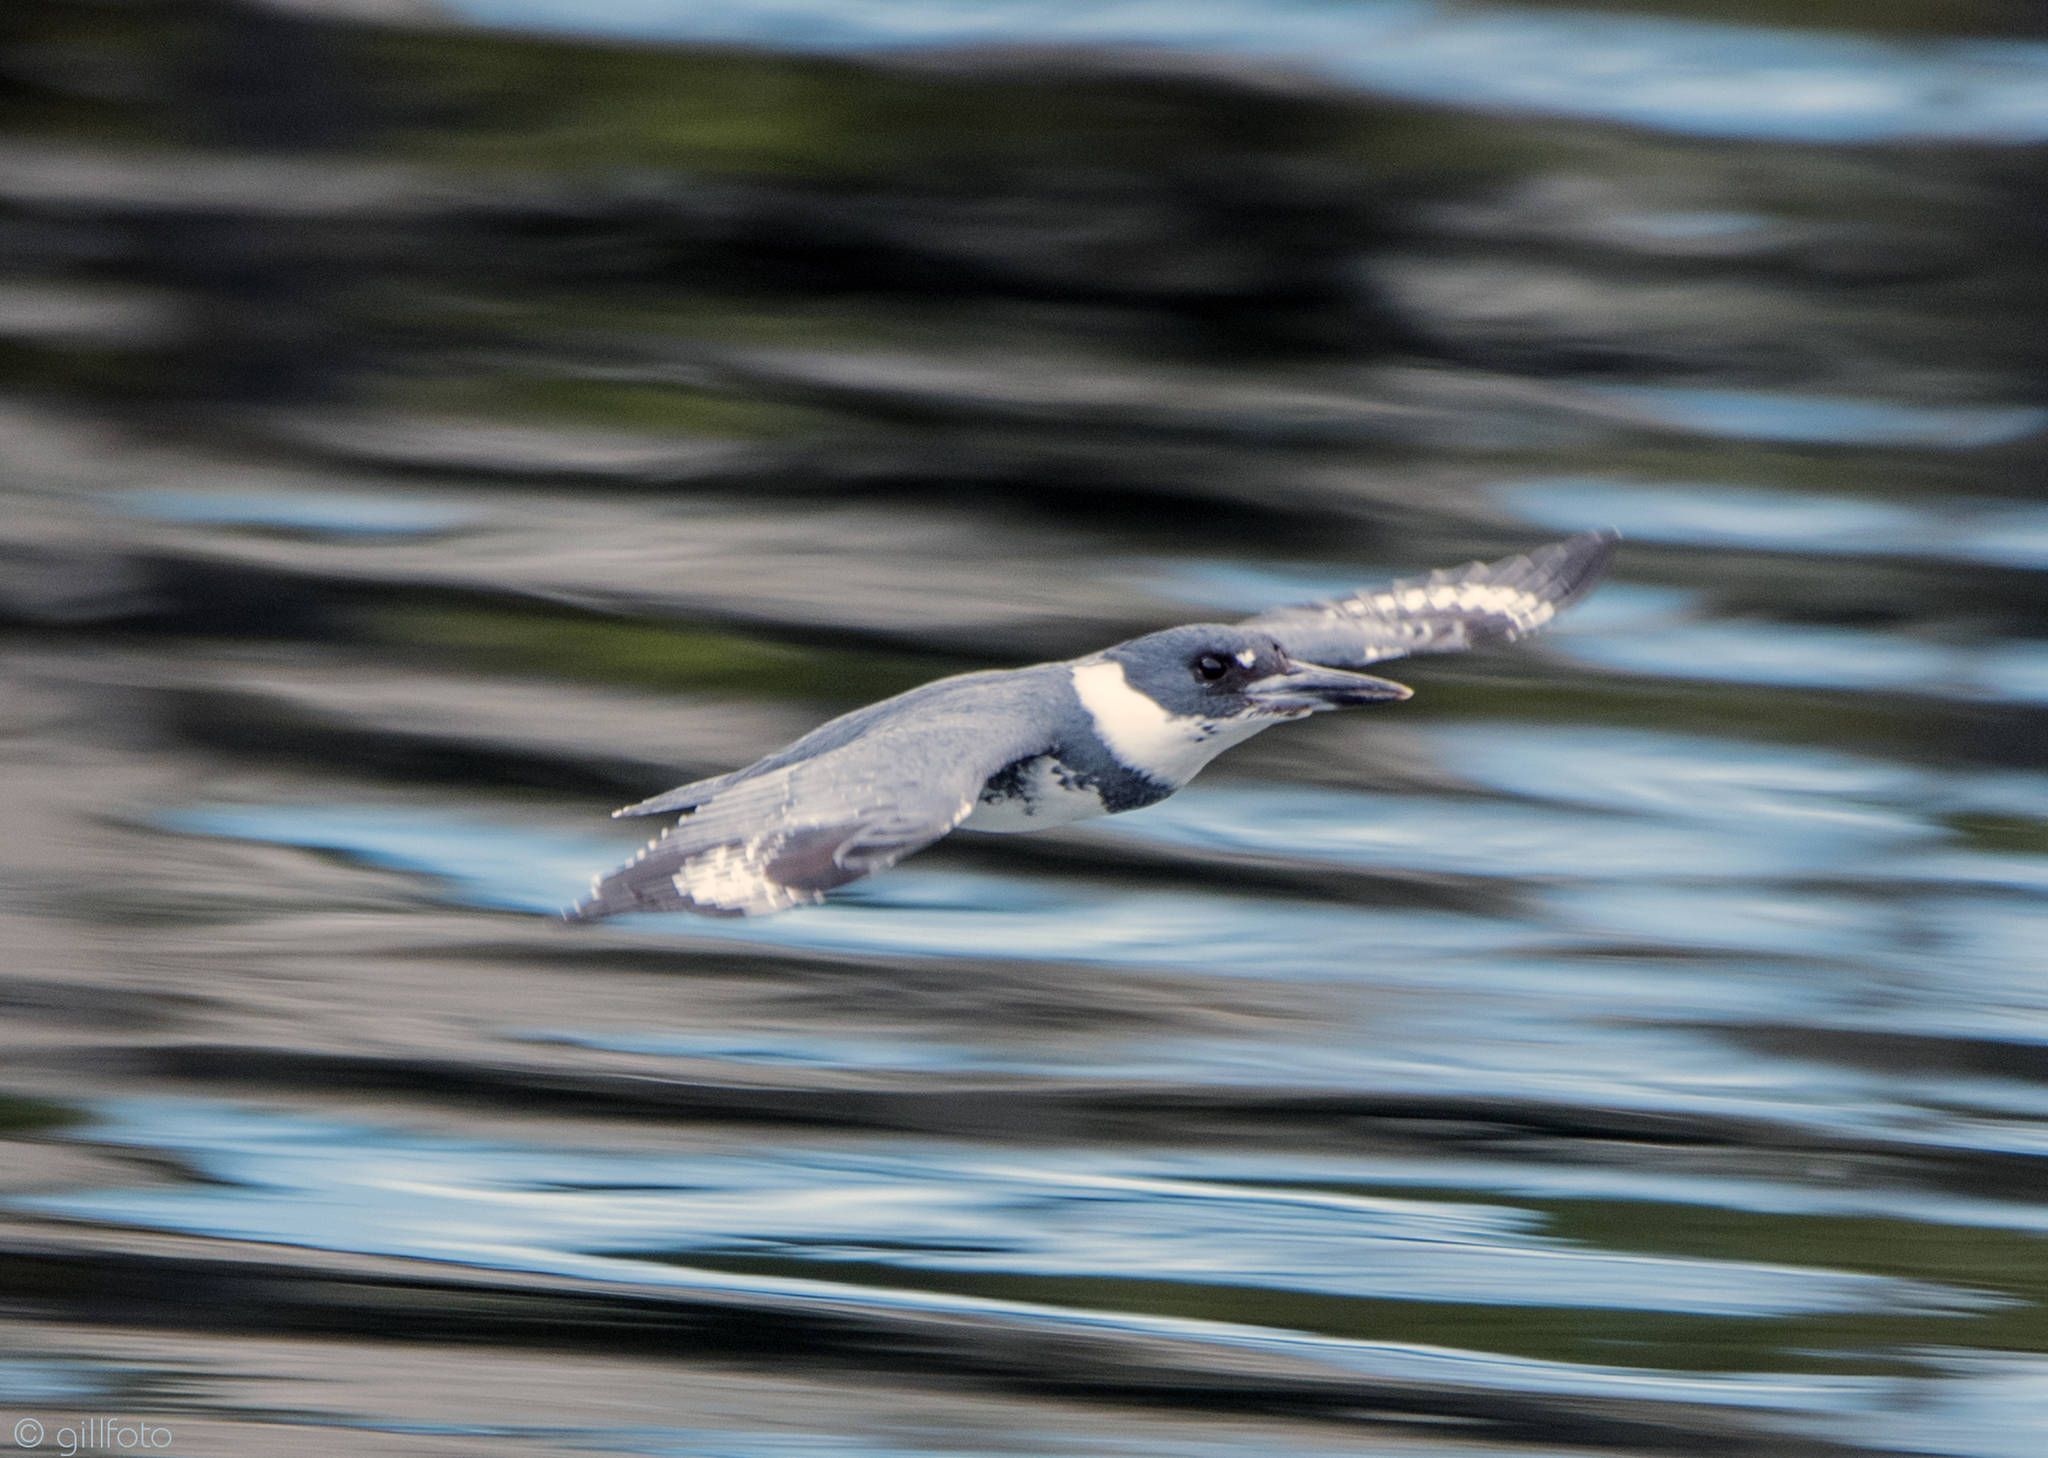 A belted kingfisher at Don D. Statter Memorial Boat Harbor in Auke Bay in Juneau, Alaska on April 12, 2019. (Courtesy Photo | Kenneth Gill)